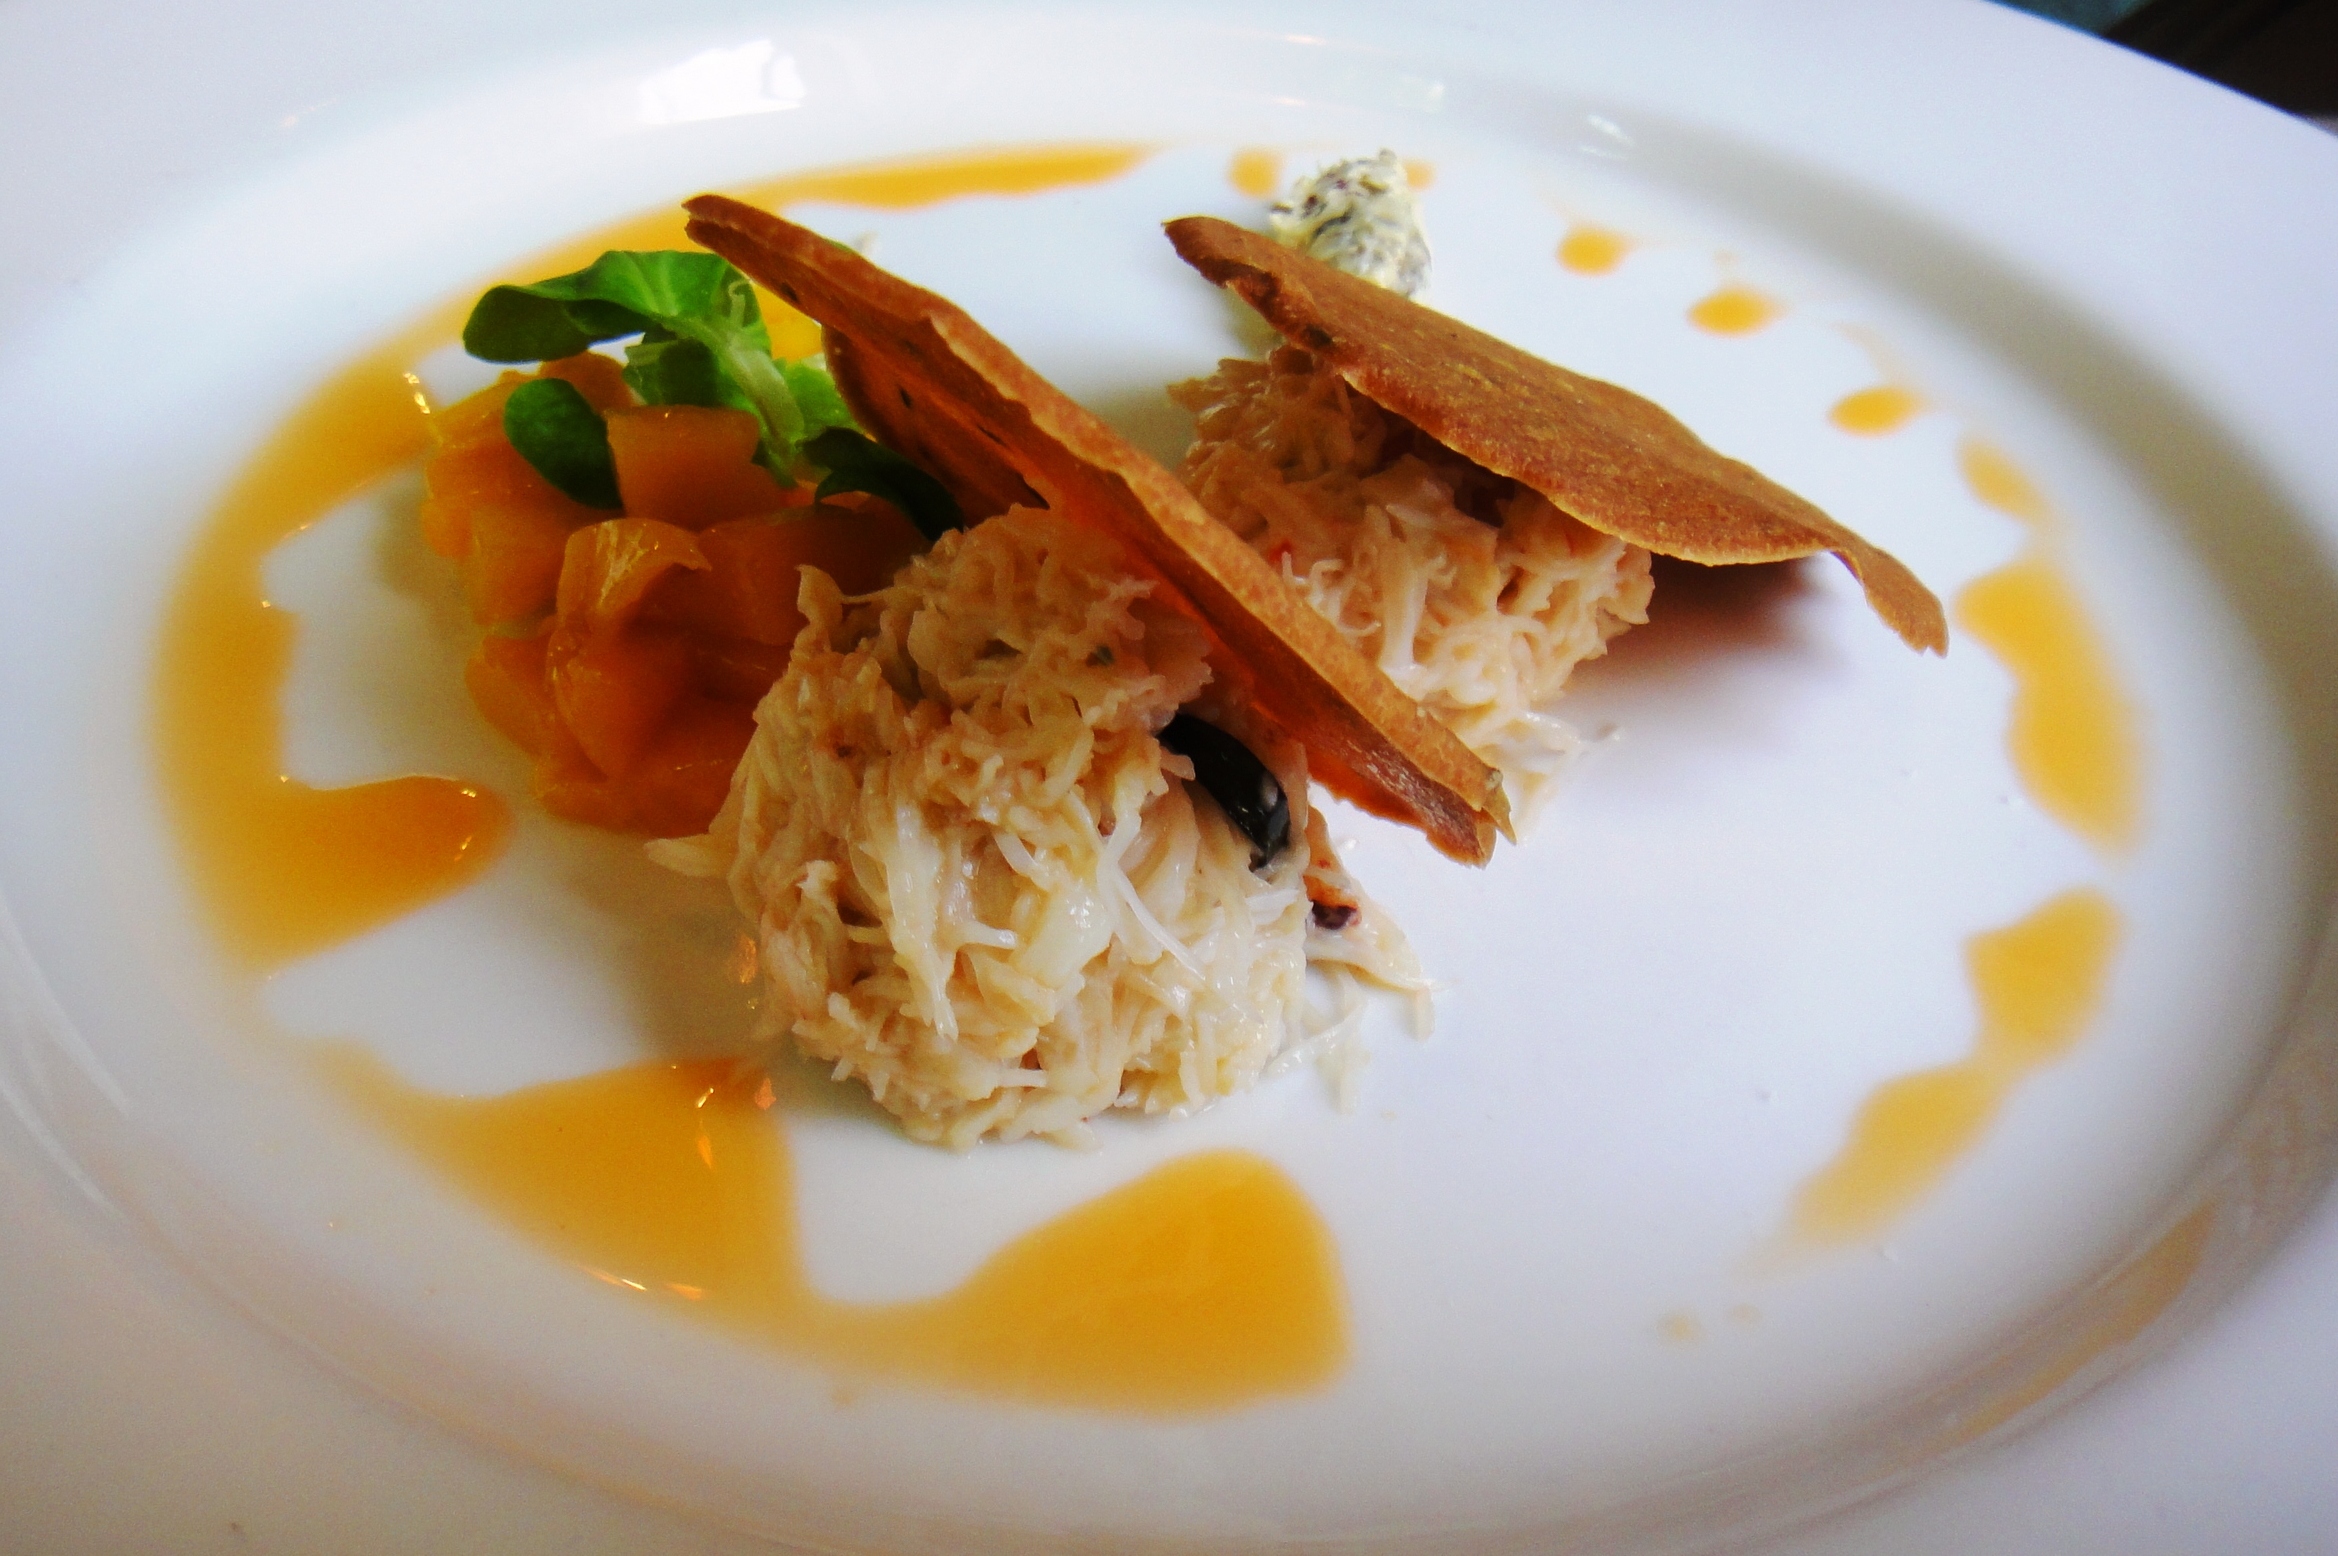 Peekytoe crabmeat with cumin crackers and mango salsa, surrounded by lobster oil